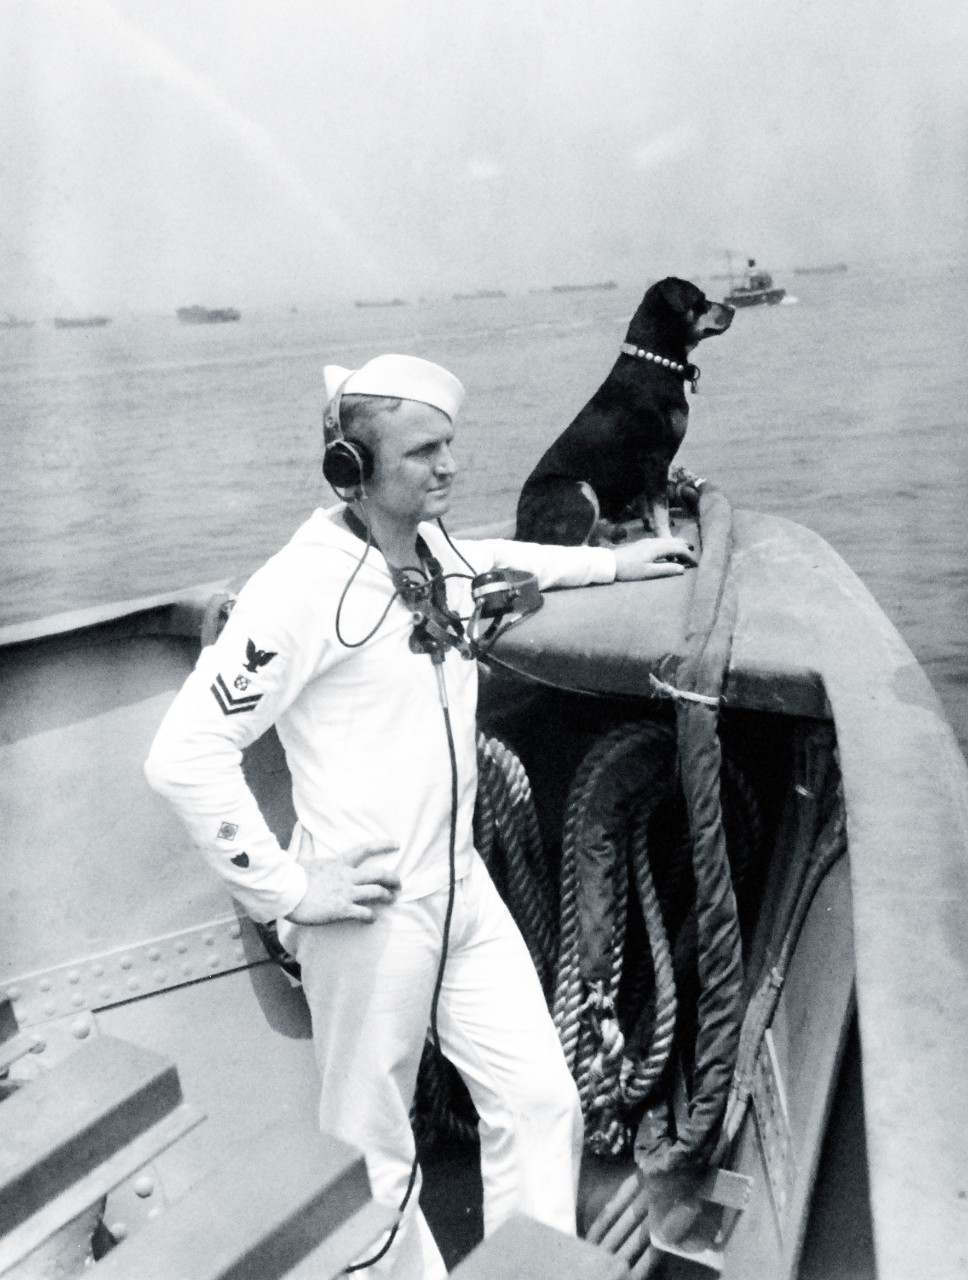 <p>26-G-1979: Atlantic Convoy. Sinbad, sentry dog for the US Coast Guard cutter, USCGC Campbell (WPG-32), and a crewman keep their eyes on the rest of the convoy, probably circa 1943. Sinbad was the Coast Guard Dog of the Year for 1943. Note, Campbell was commissioned in 1936 and was not decommissioned until 1982. She was later sunk by the US Navy in target practice two years later. Campbell has the nickname “Queen of the Seas”. US Coast Guard photograph, now in the collections of the National Archives. (Taken at NARA II on 30 January 2014).</p>
